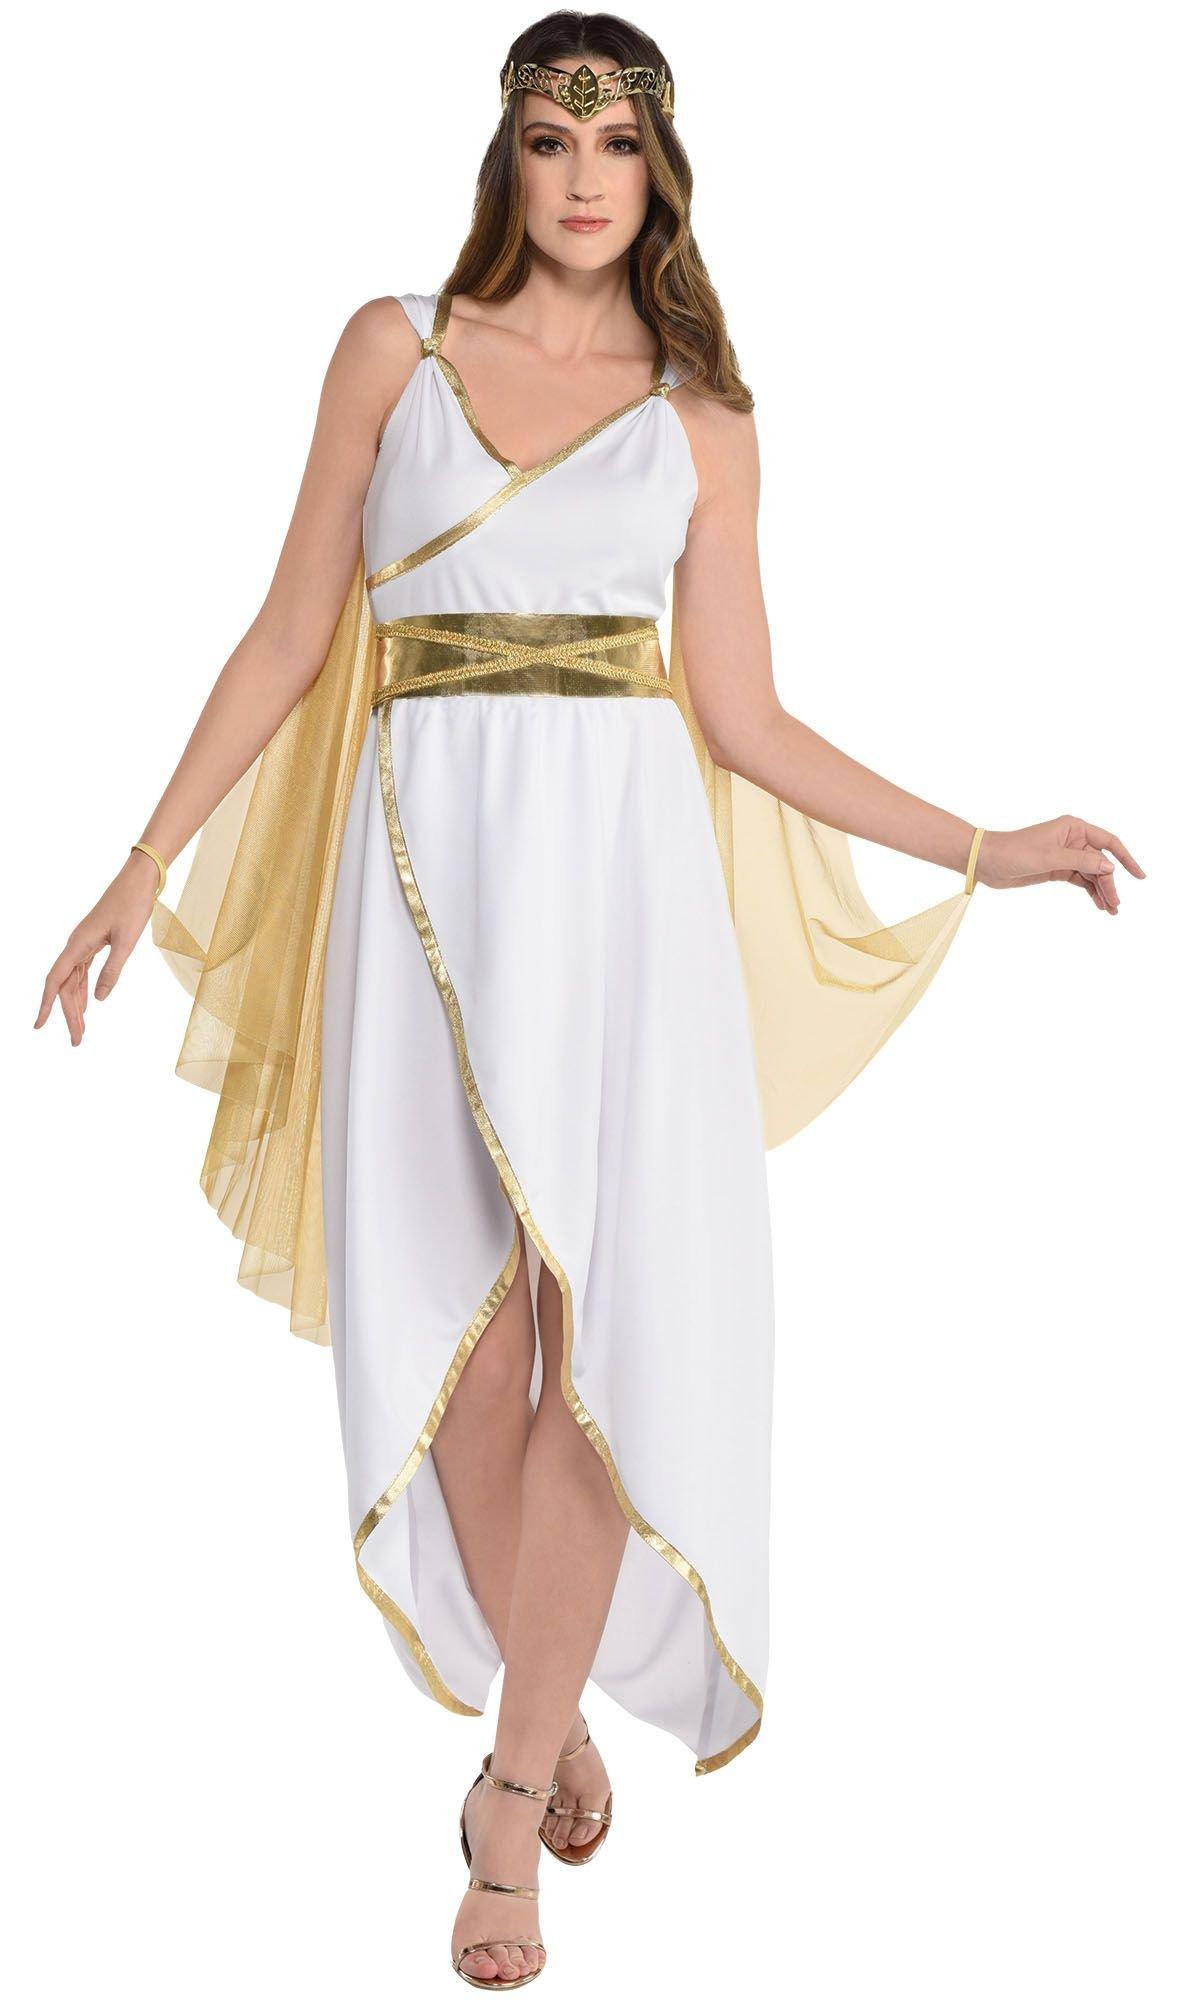 Egyptian, Roman & Greek Costumes for Kids & Adults | Party City